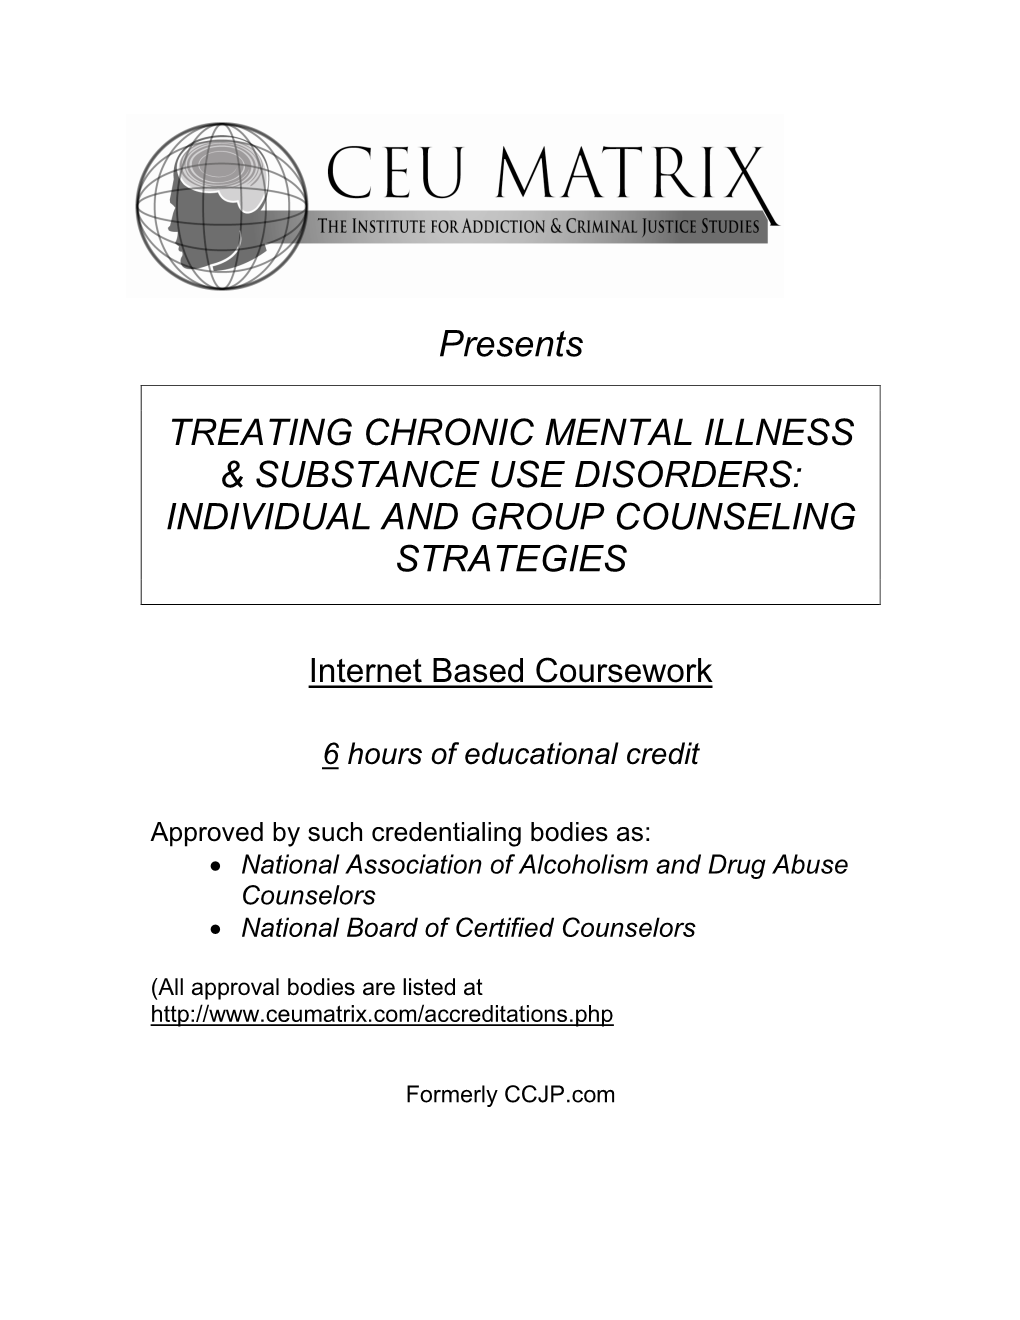 Presents TREATING CHRONIC MENTAL ILLNESS & SUBSTANCE USE DISORDERS: INDIVIDUAL and GROUP COUNSELING STRATEGIES